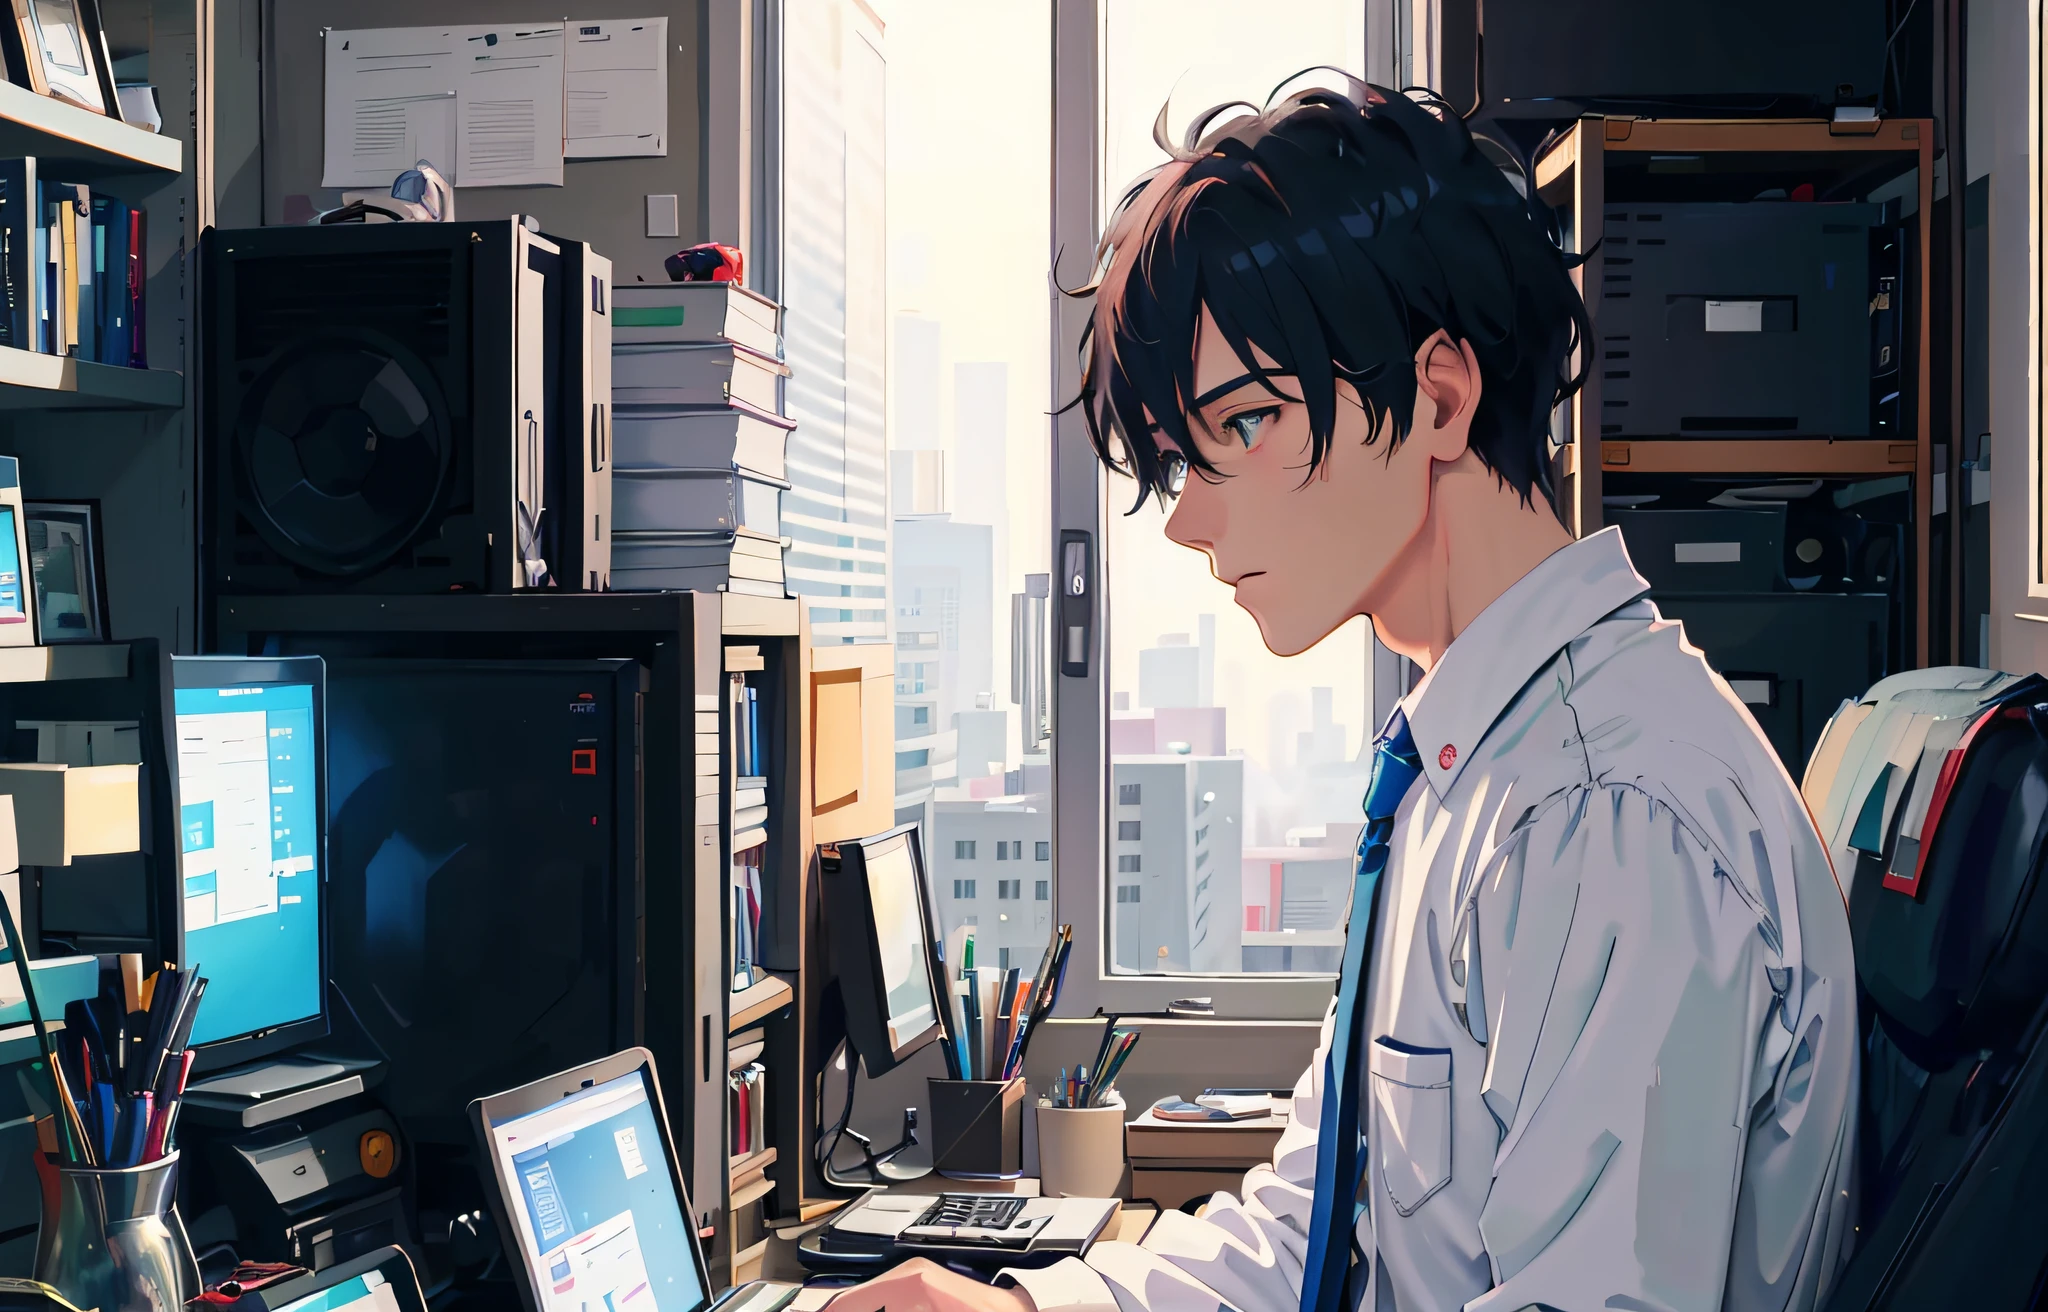 anime guy sitting at a desk with a laptop and a monitor, 4k anime wallpaper, anime style 4 k, digital anime illustration, young anime man, anime art wallpaper 4k, anime art wallpaper 4 k, detailed digital anime art, anime wallpaper 4 k, anime wallpaper 4k, modern anime style, 4 k manga wallpaper, digital anime art, handsome anime pose